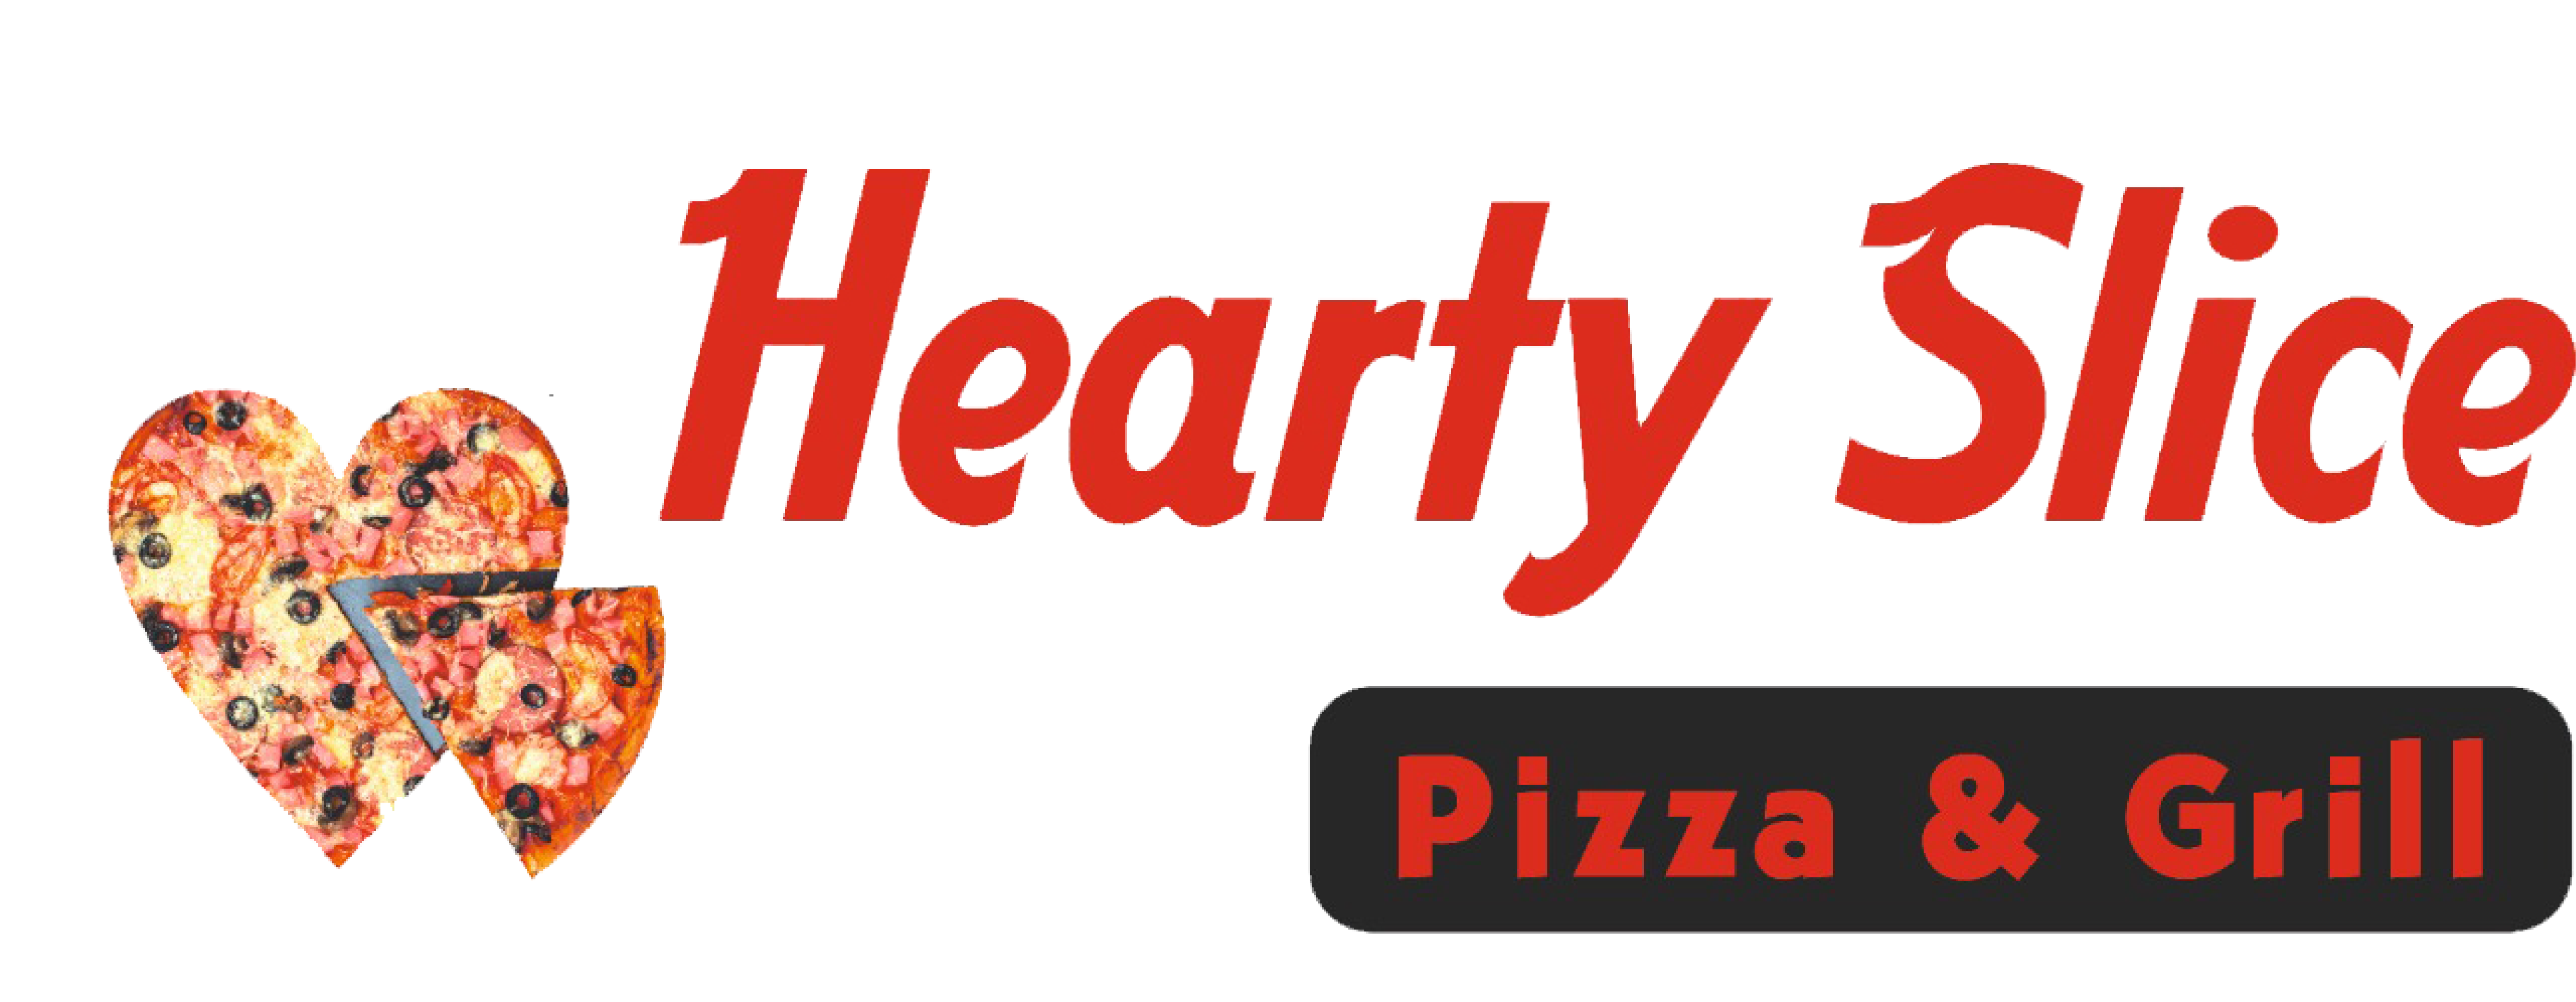 Hearty Slice Pizza & Grill